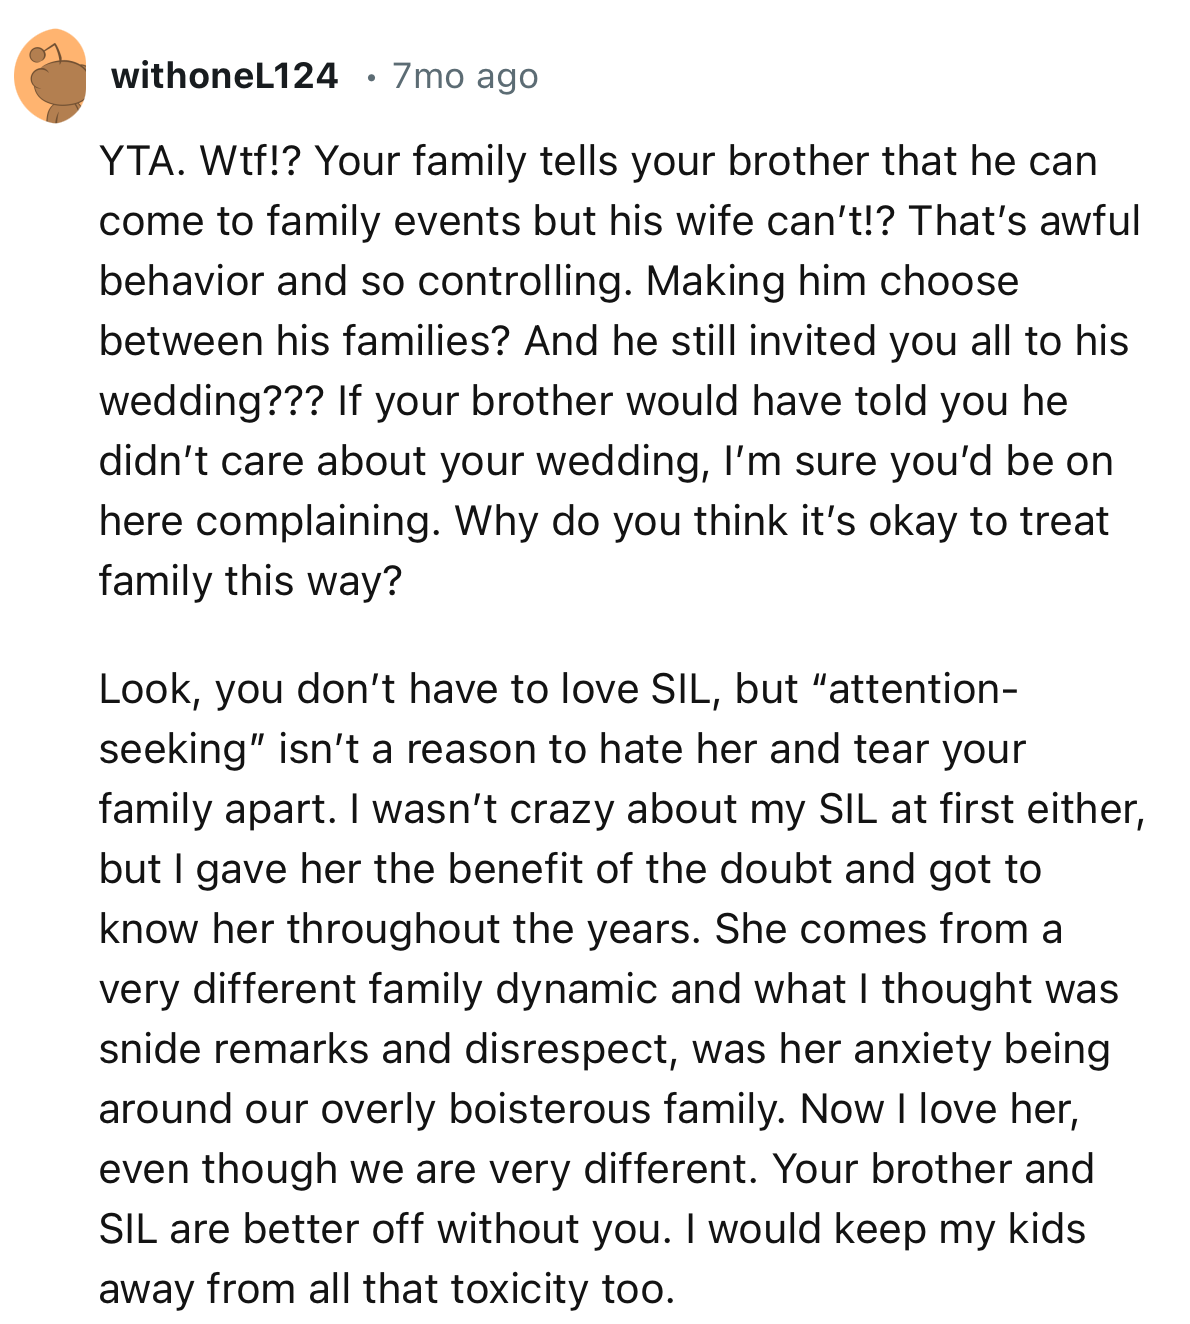 “Your family tells your brother that he can come to family events but his wife can’t!? That’s awful behavior and so controlling.”